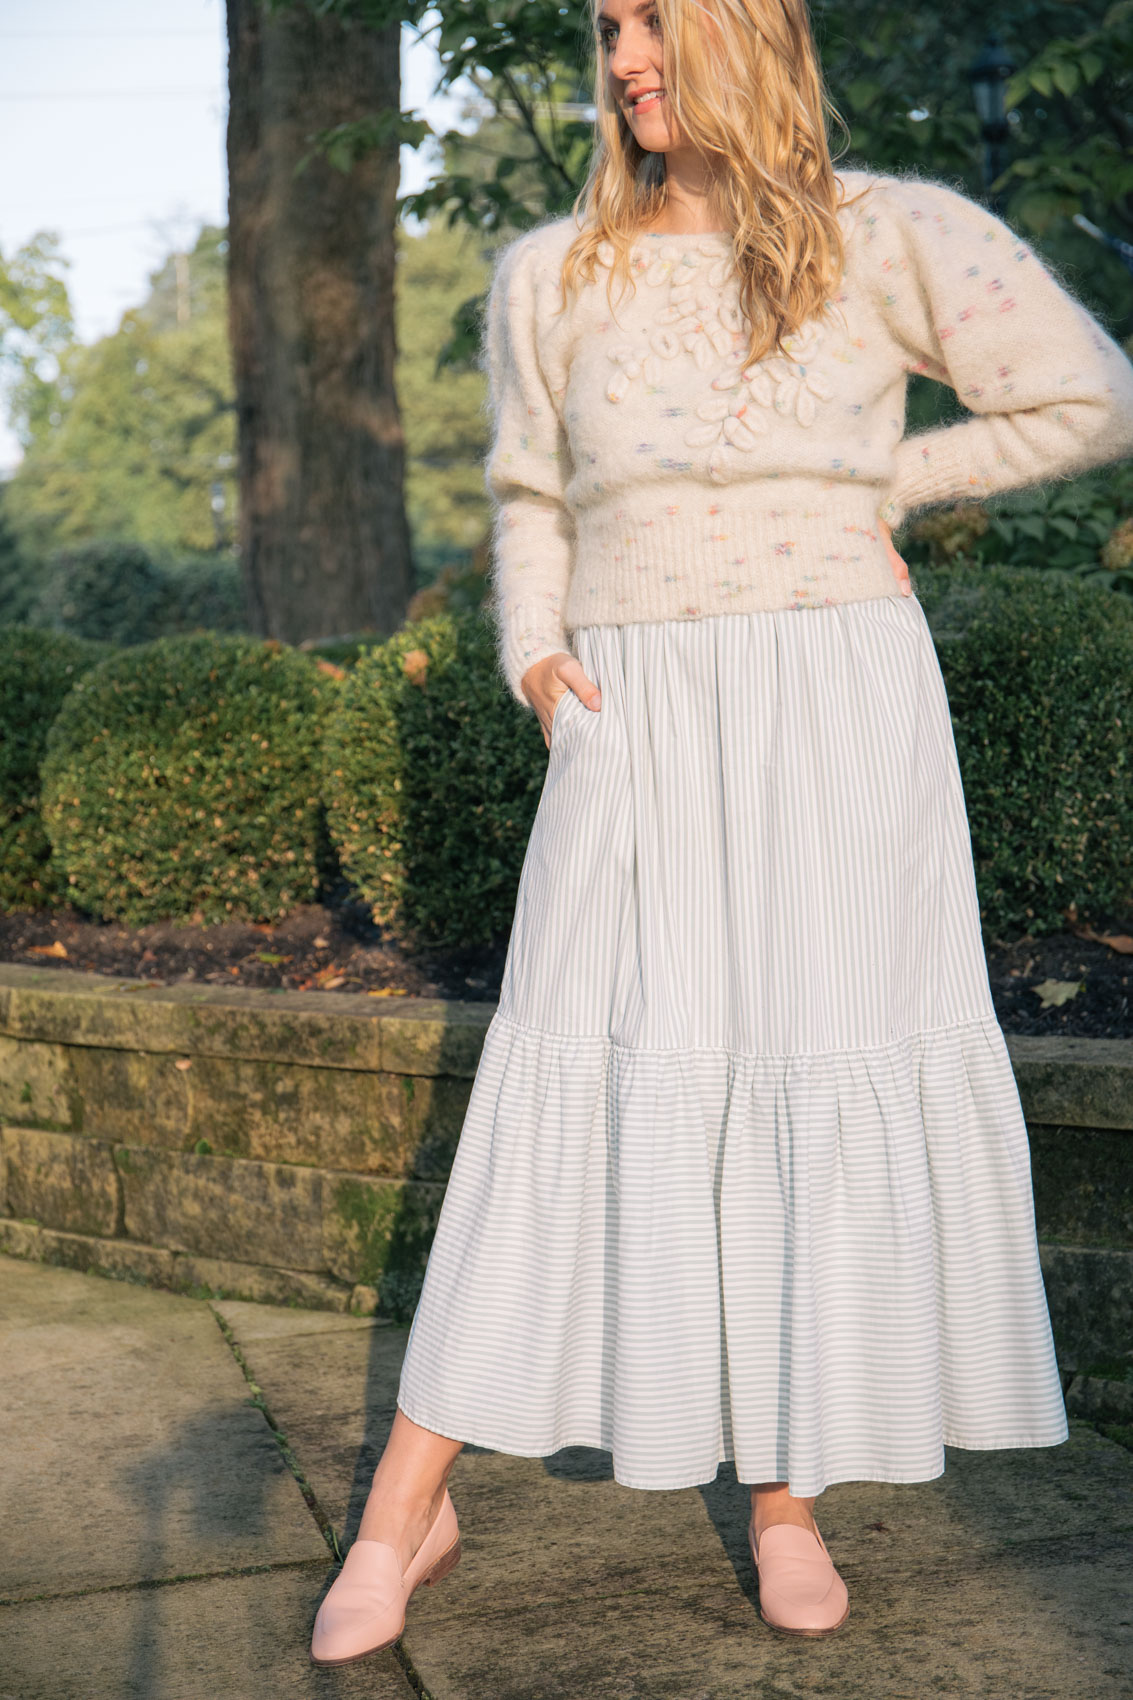 Allyn Lewis styles a cream statement puff sleeve sweater over a maxi dress for a fall 2020 outfit